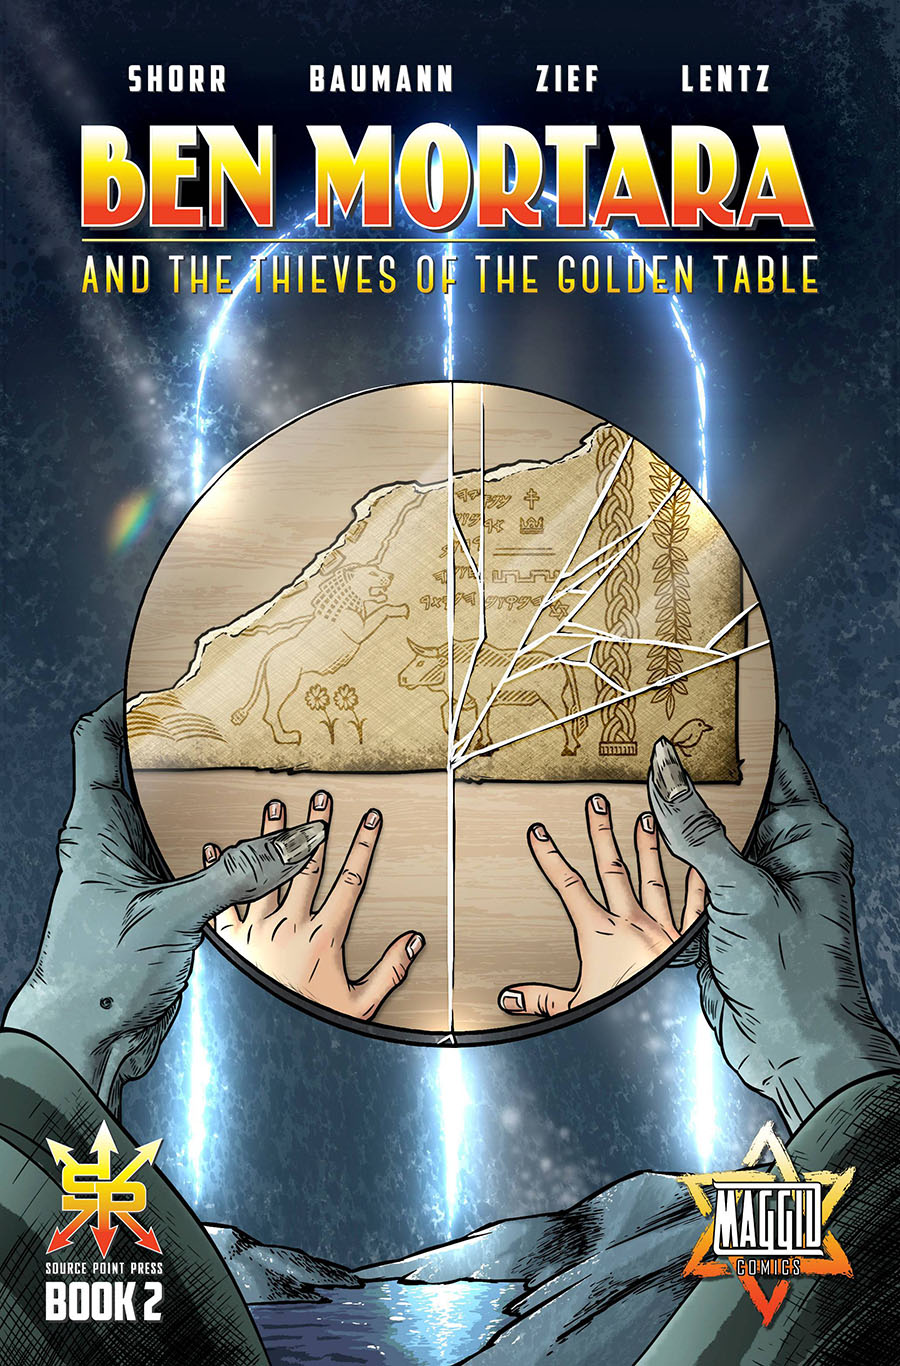 Ben Mortara And The Thieves Of The Golden Table #2